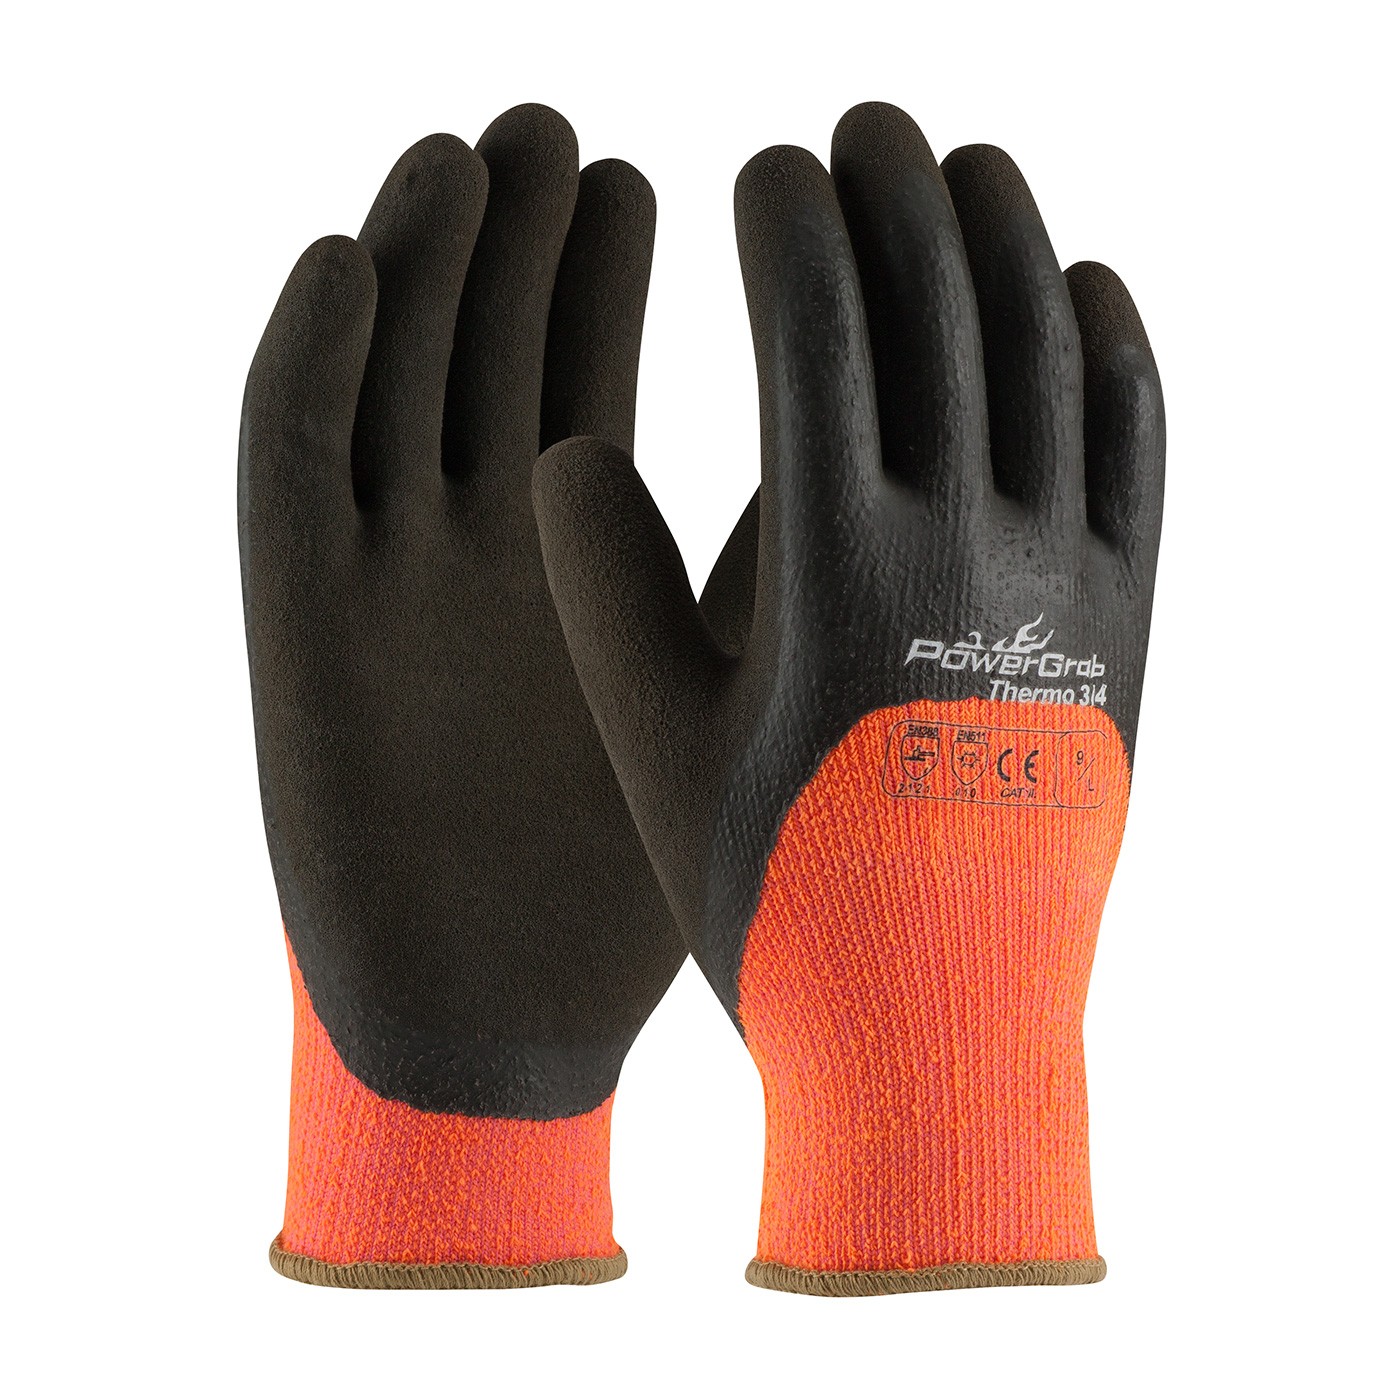 PowerGrab™ Thermo 3/4 Hi-Vis Seamless Knit Acrylic Terry Glove with Latex MicroFinish Grip on Palm, Fingers & Knuckles  (#41-1475)